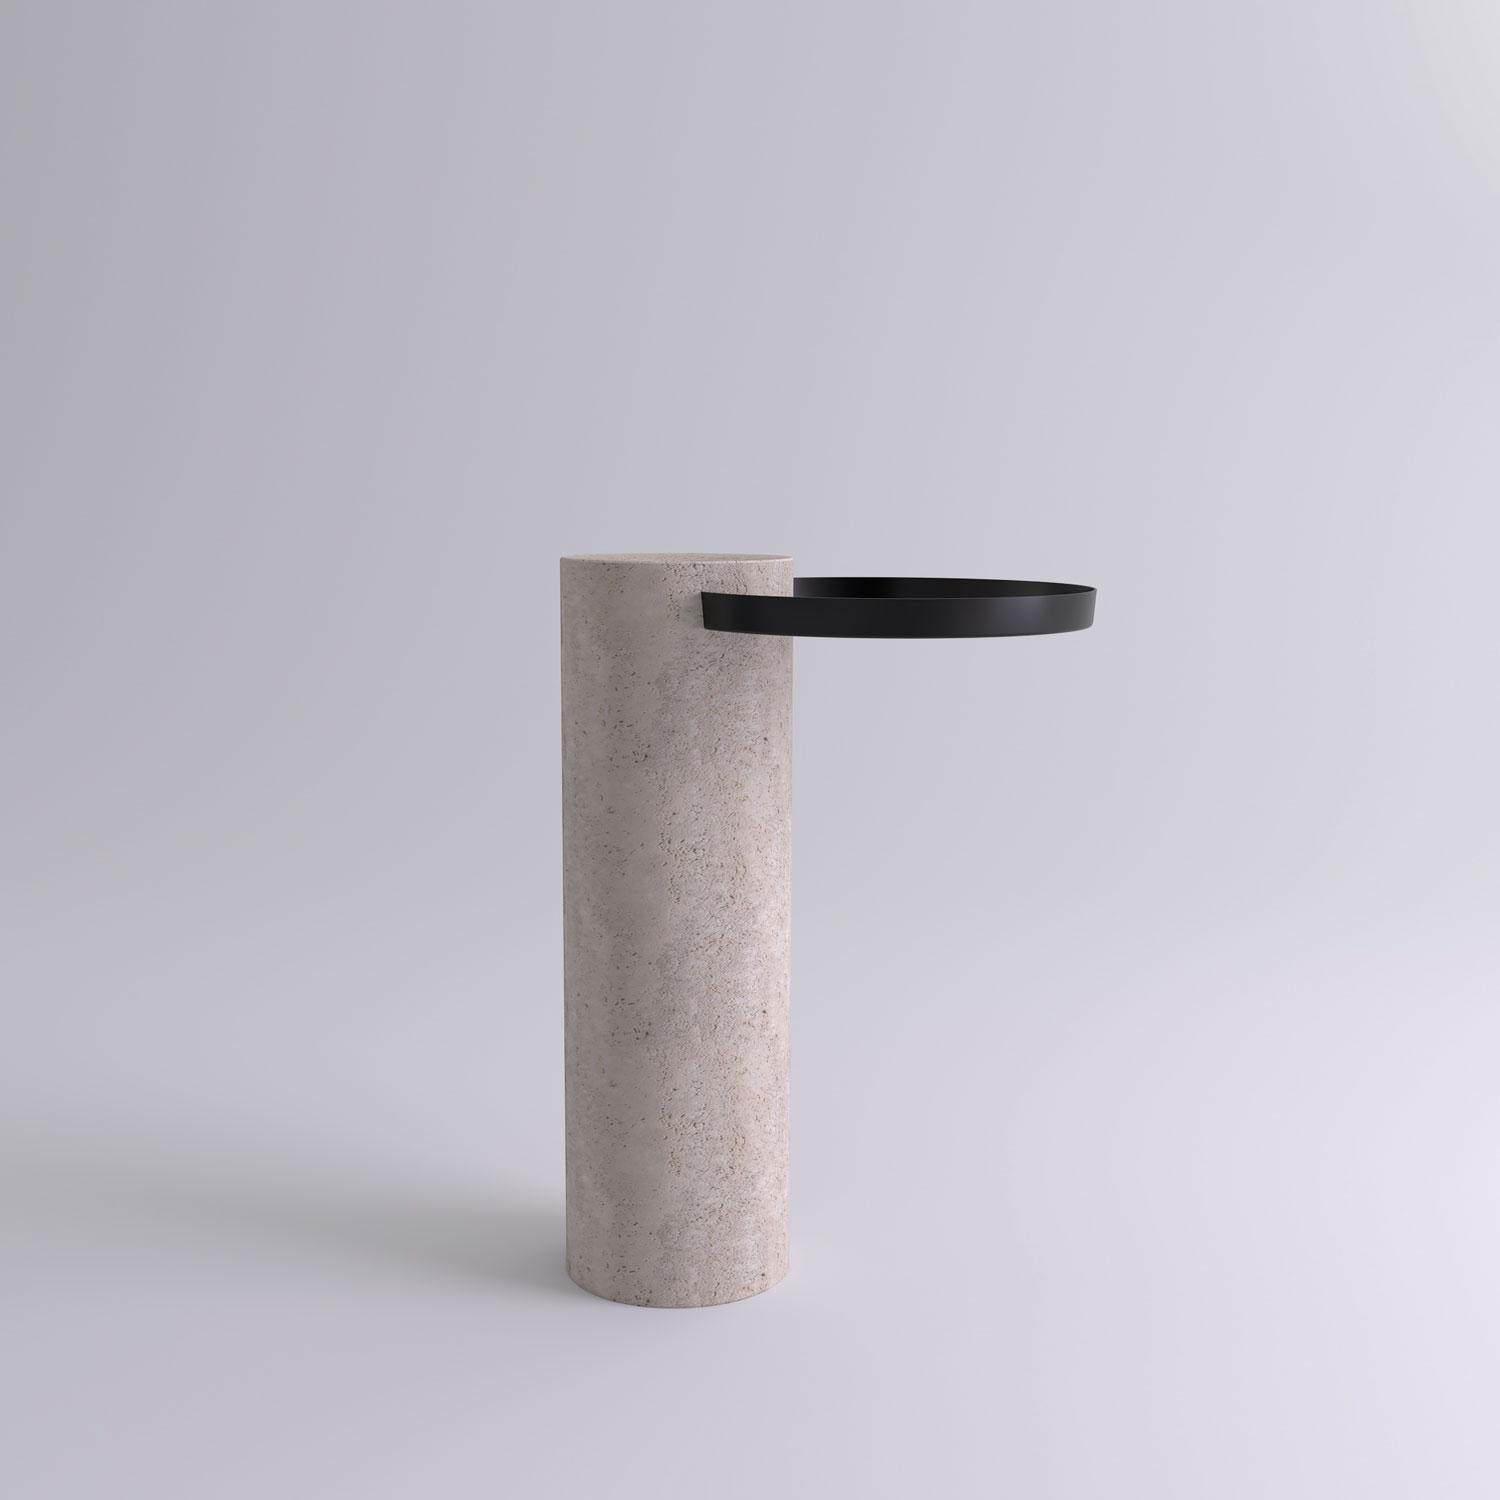 High travertine contemporary guéridon, Sebastian Herkner
Dimensions: D 42 x H 57 cm
Materials: Travertine marble, black metal tray

The salute table exists in 3 sizes, 4 different marble stones for the column and 5 different finishes for the